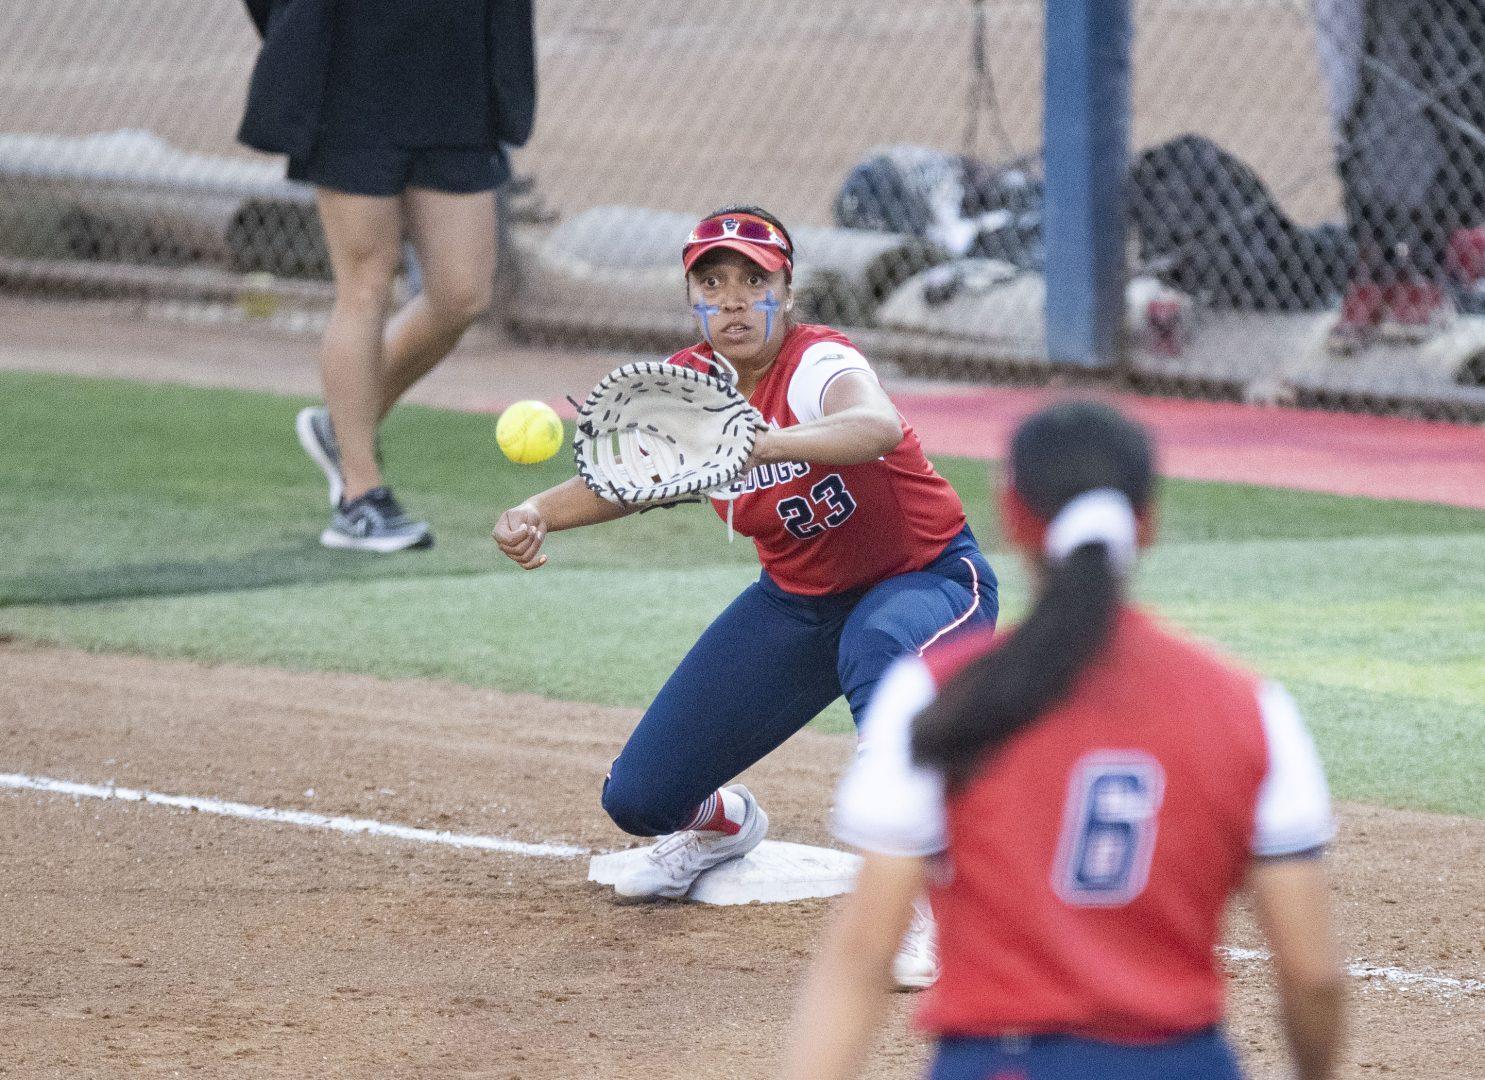 Senior Vanessa M. Hernandez catches the ball at first to get an out after a hit in the first game of
the home series against San Diego State on March 26, 2022 (Wyatt Bible/ The Collegian)